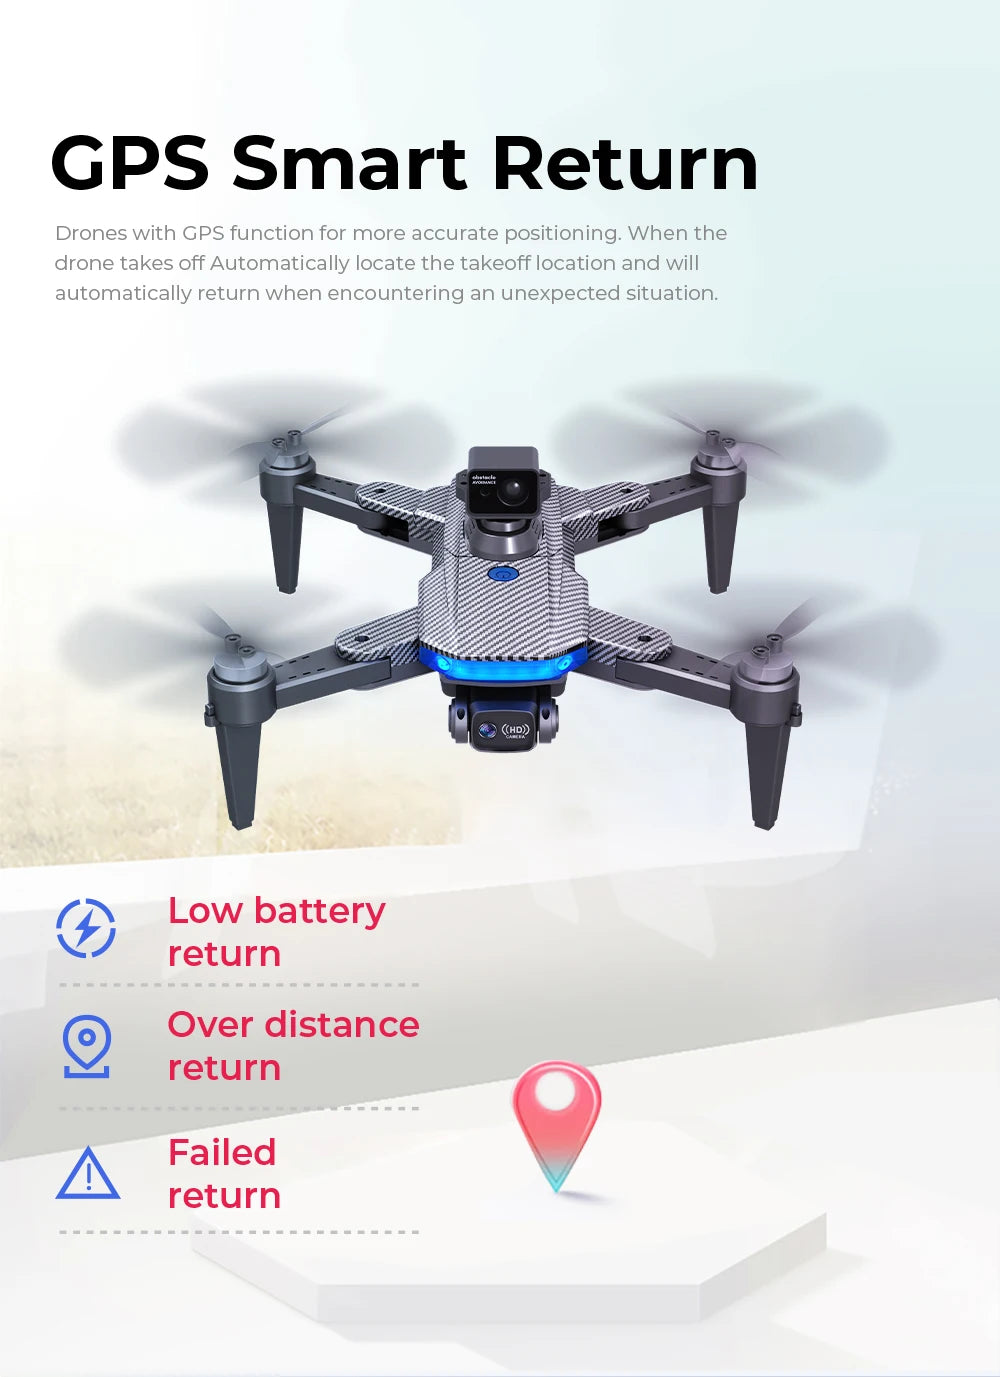 HJ90 PRO GPS Drone, Smart Return Drones with GPS function for more accurate positioning . automatically returns when encountering